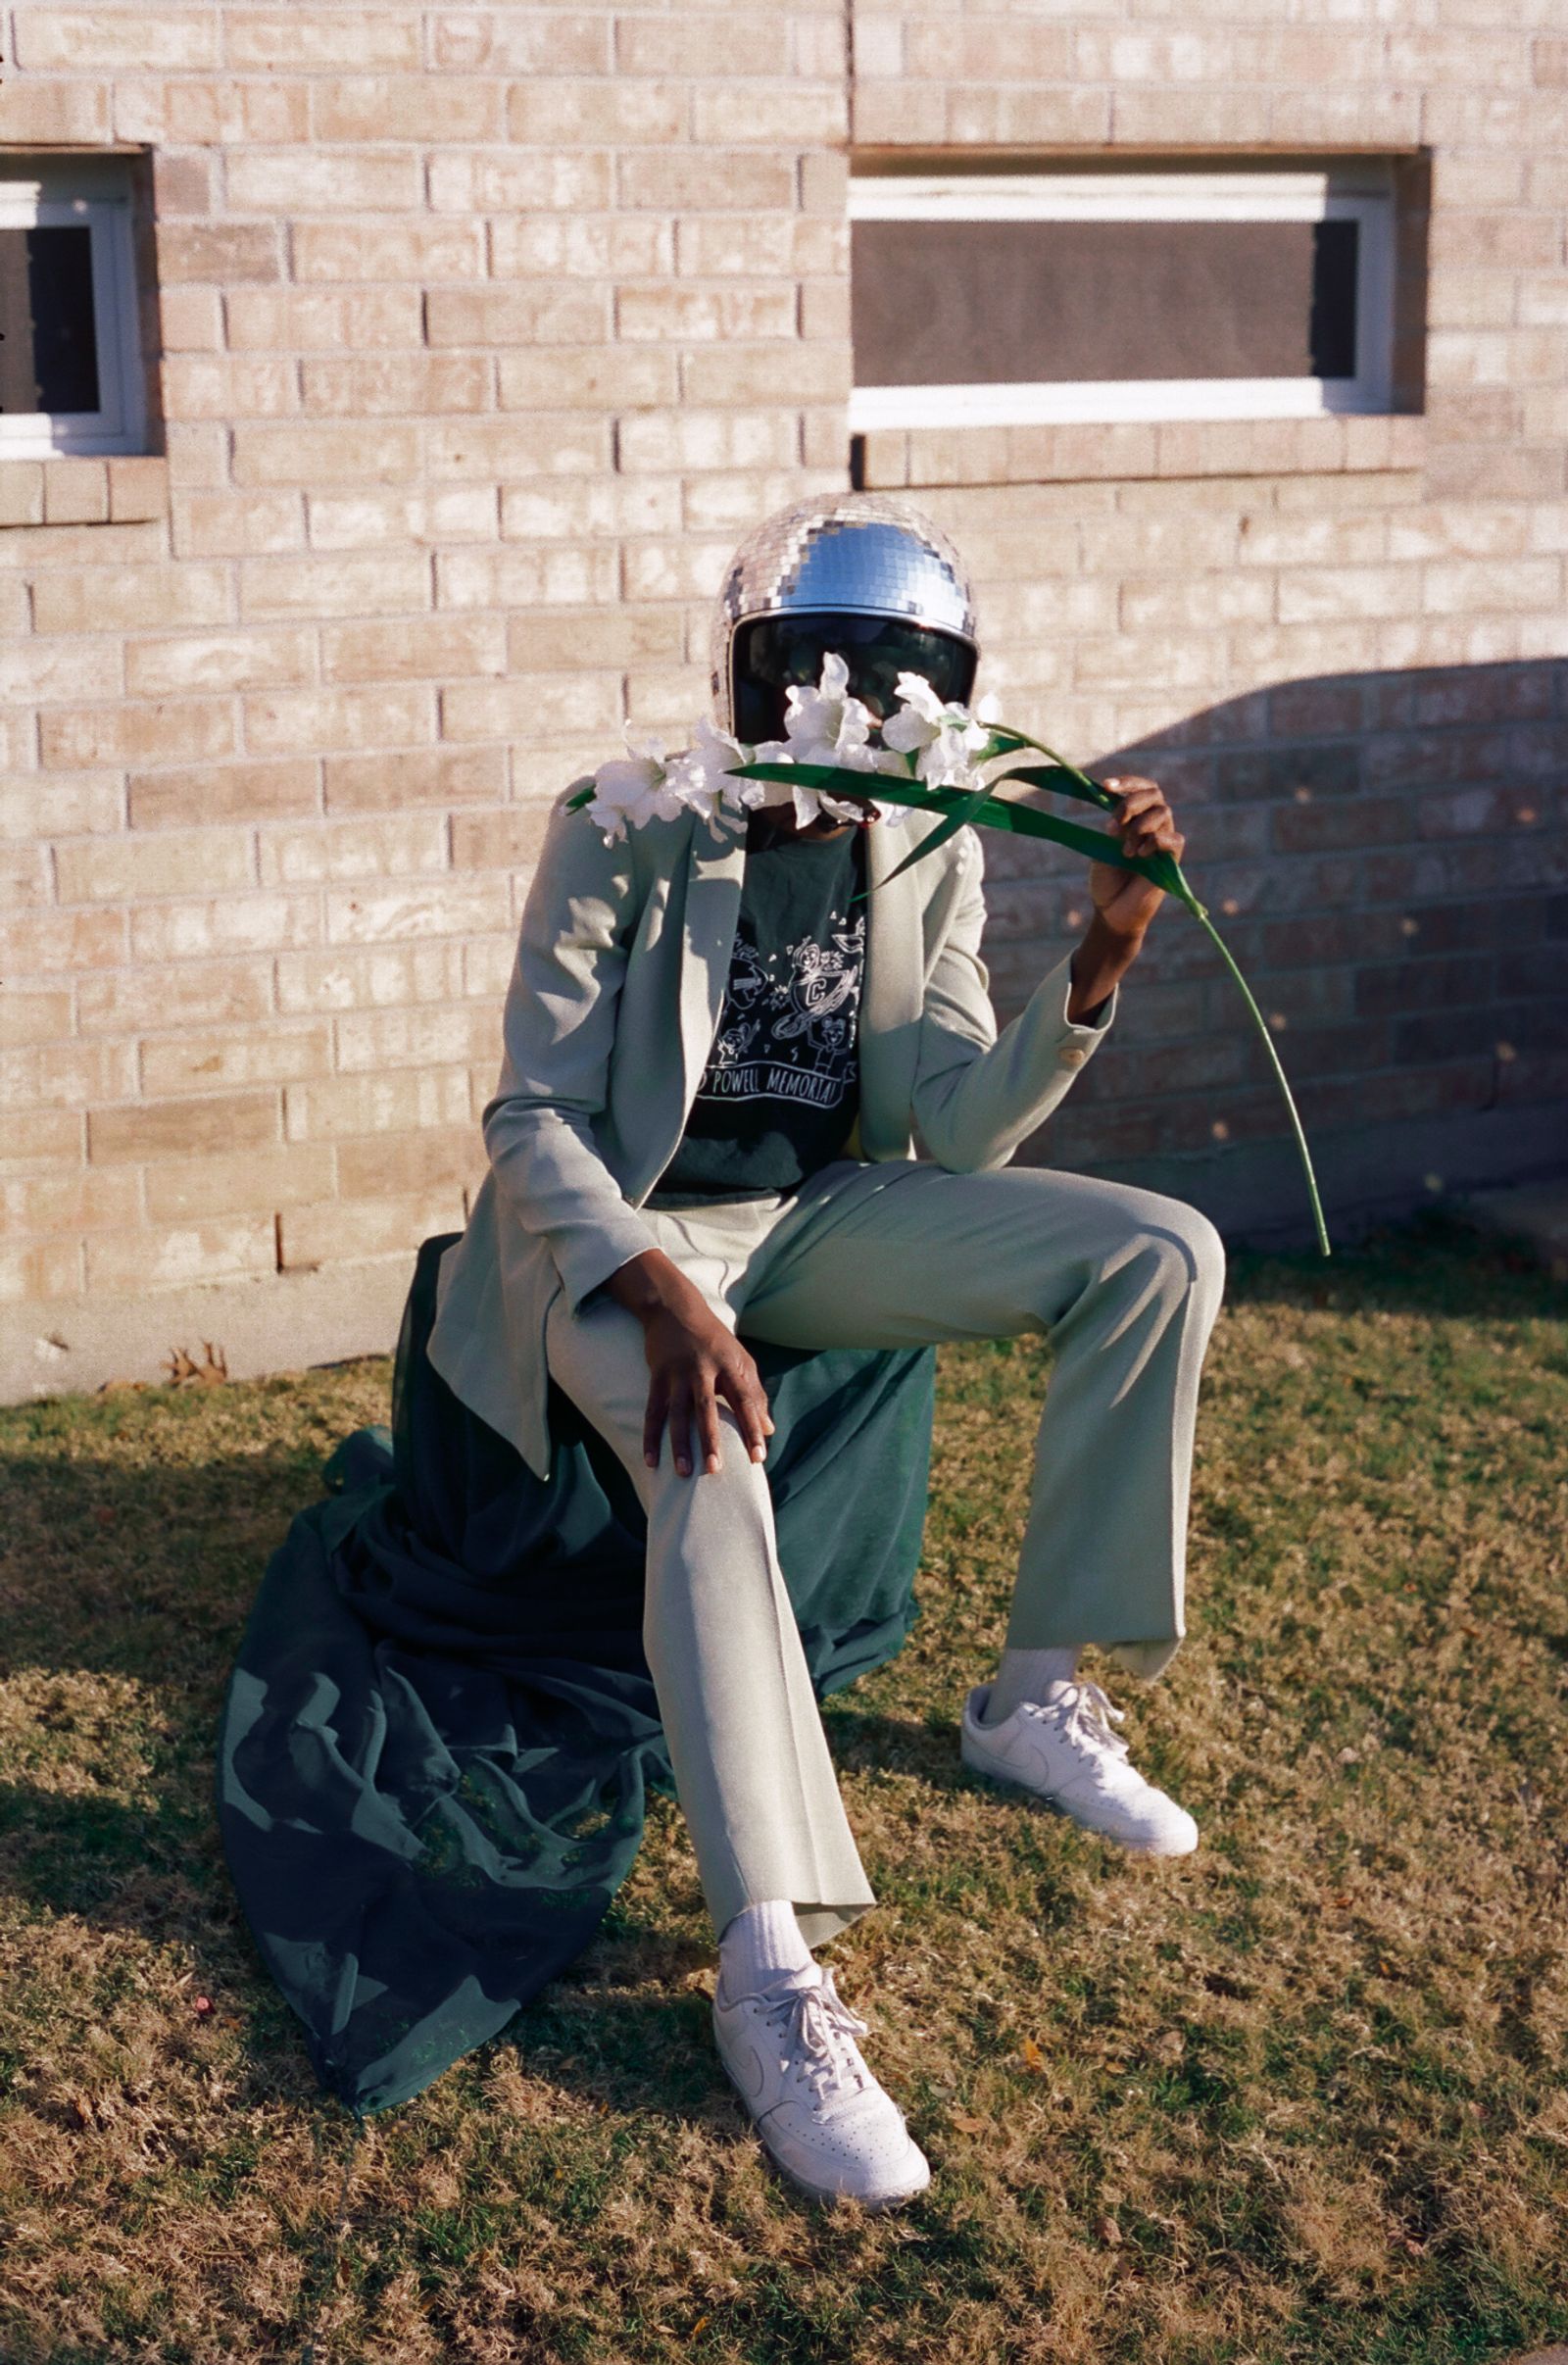 © Ozodi Onyeabor - Image from the "Asher, en route" photography project